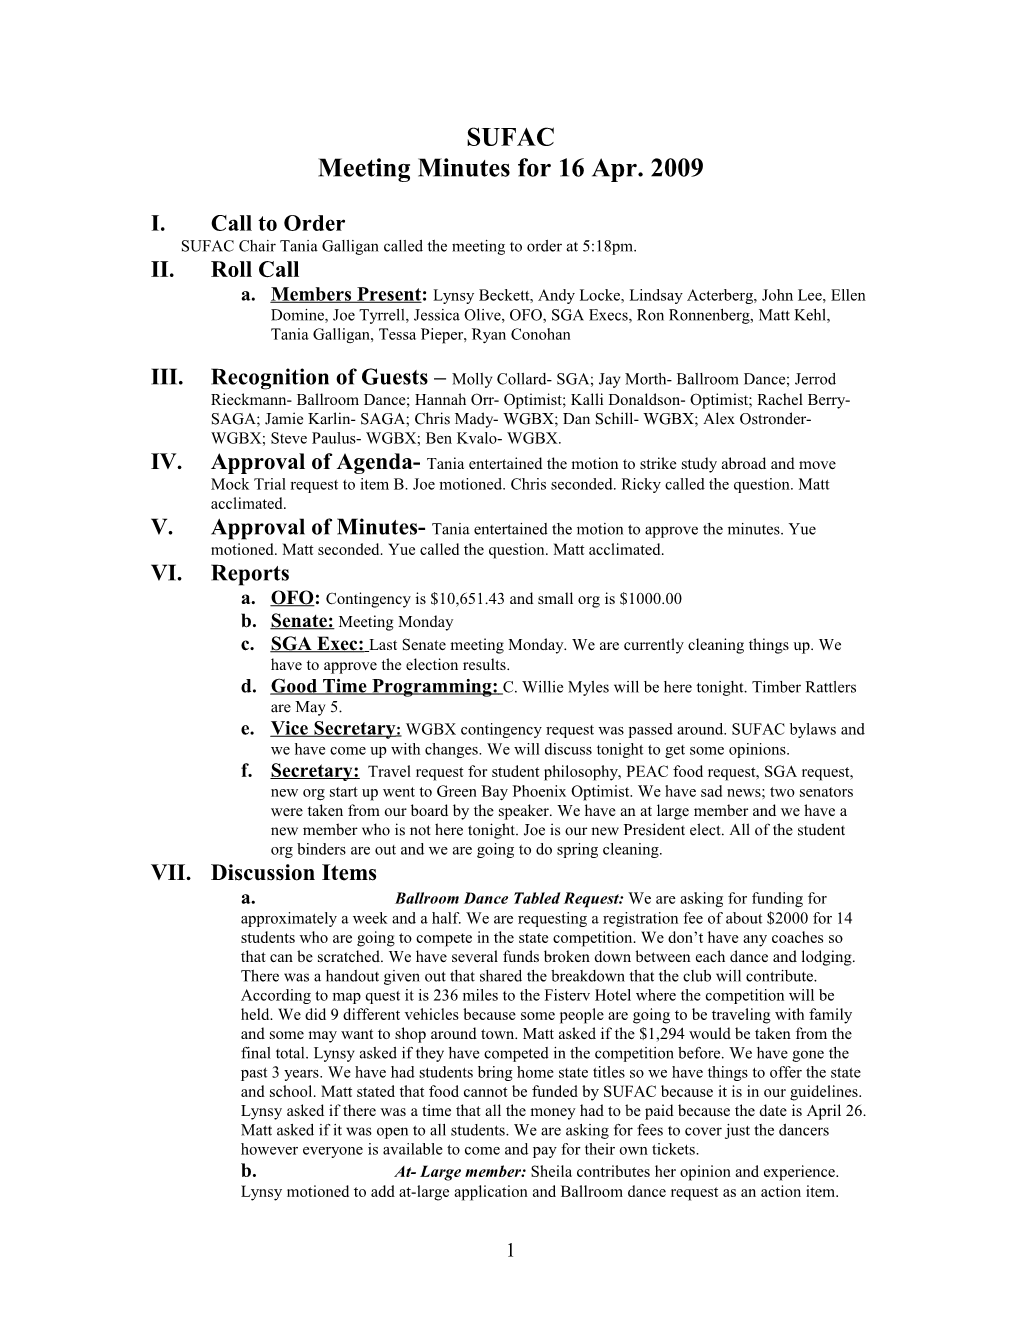 Meeting Minutes for 16 Apr. 2009